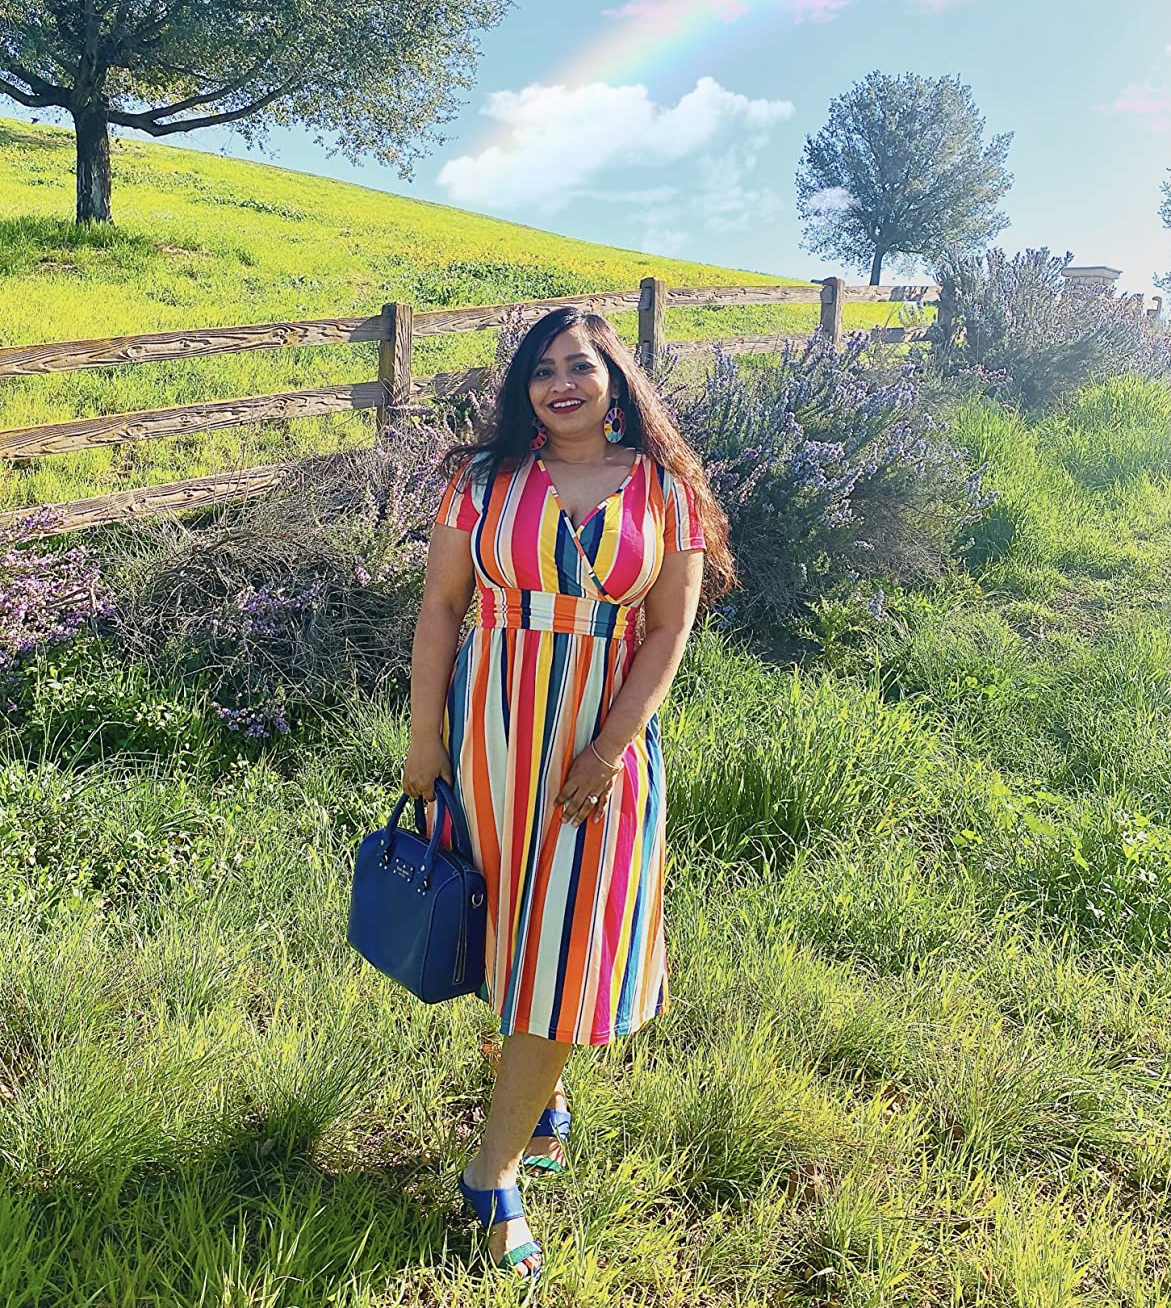 Reviewer is wearing the multi-colored vertically striped wrap dress with blue shoes and a blue bag